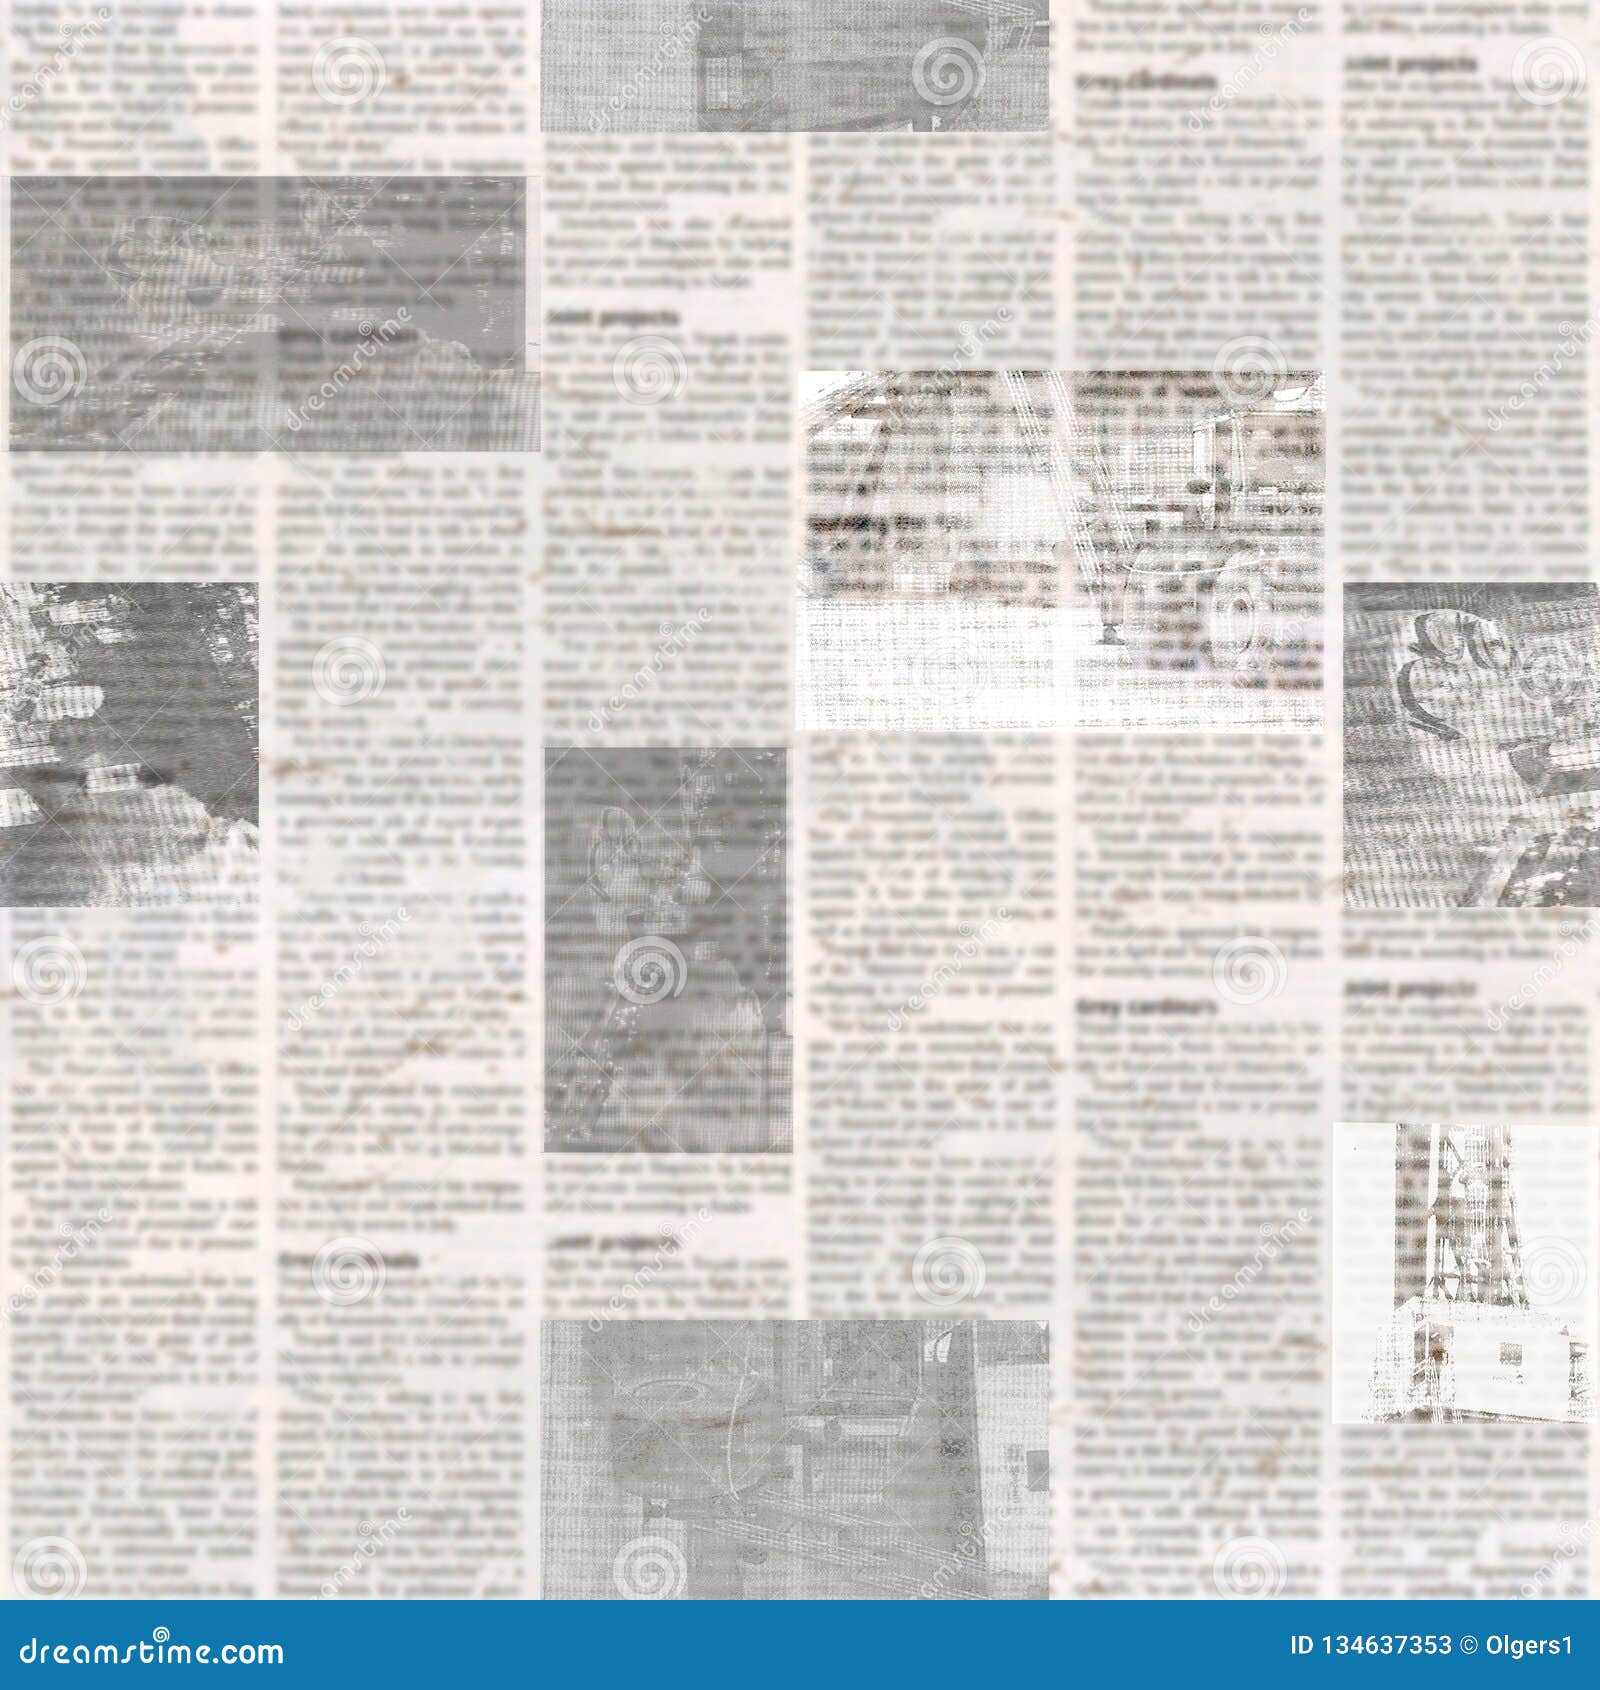 40 639 Newspaper Background Photos Free Royalty Free Stock Photos From Dreamstime